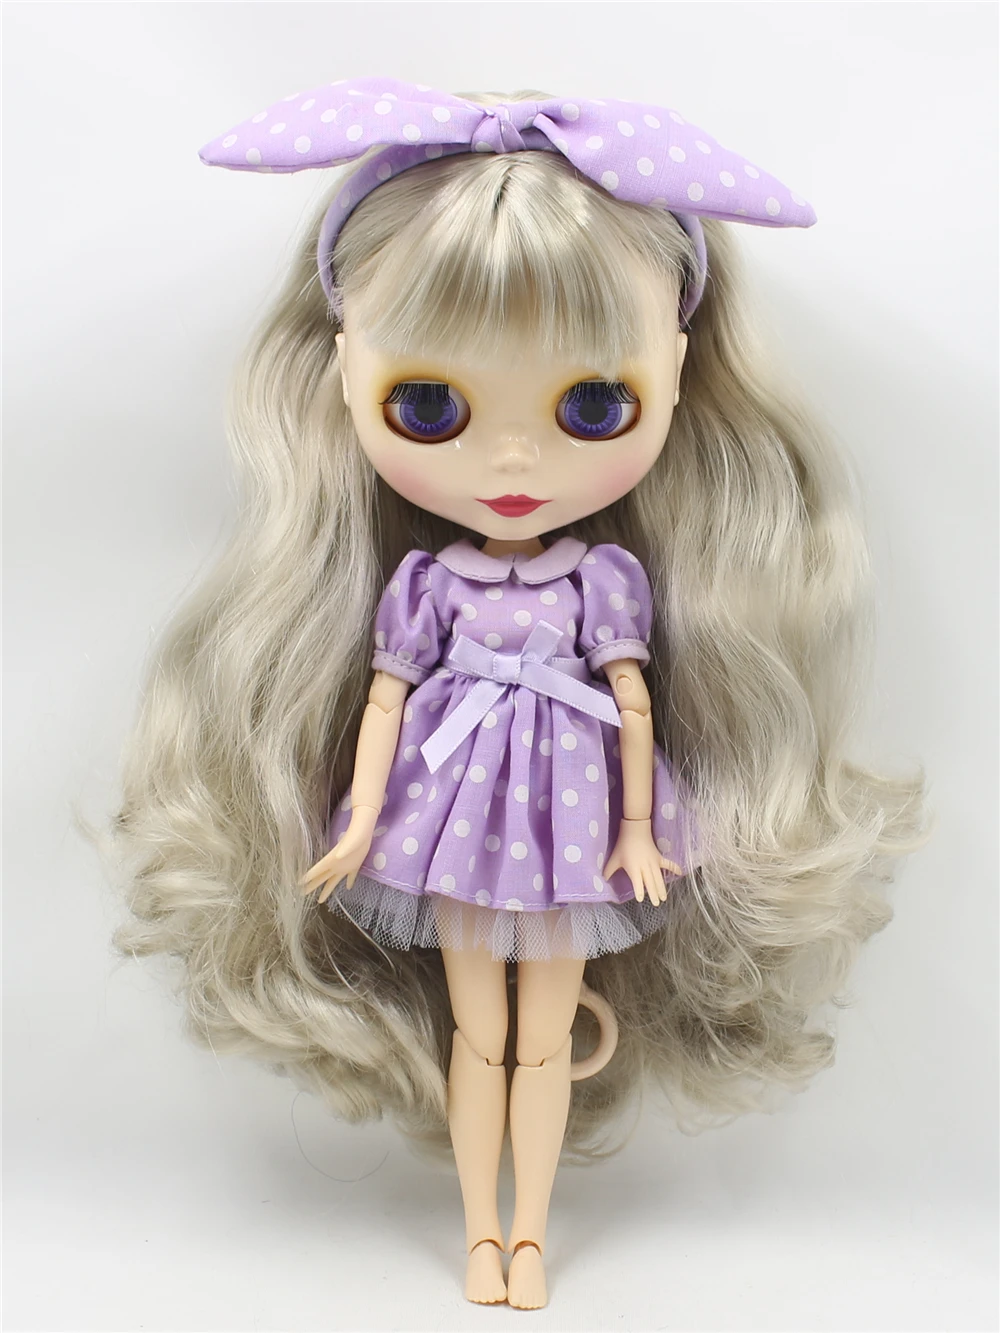 Neo Blythe Doll with Grey Hair, White Skin, Shiny Cute Face & Factory Jointed Body 2